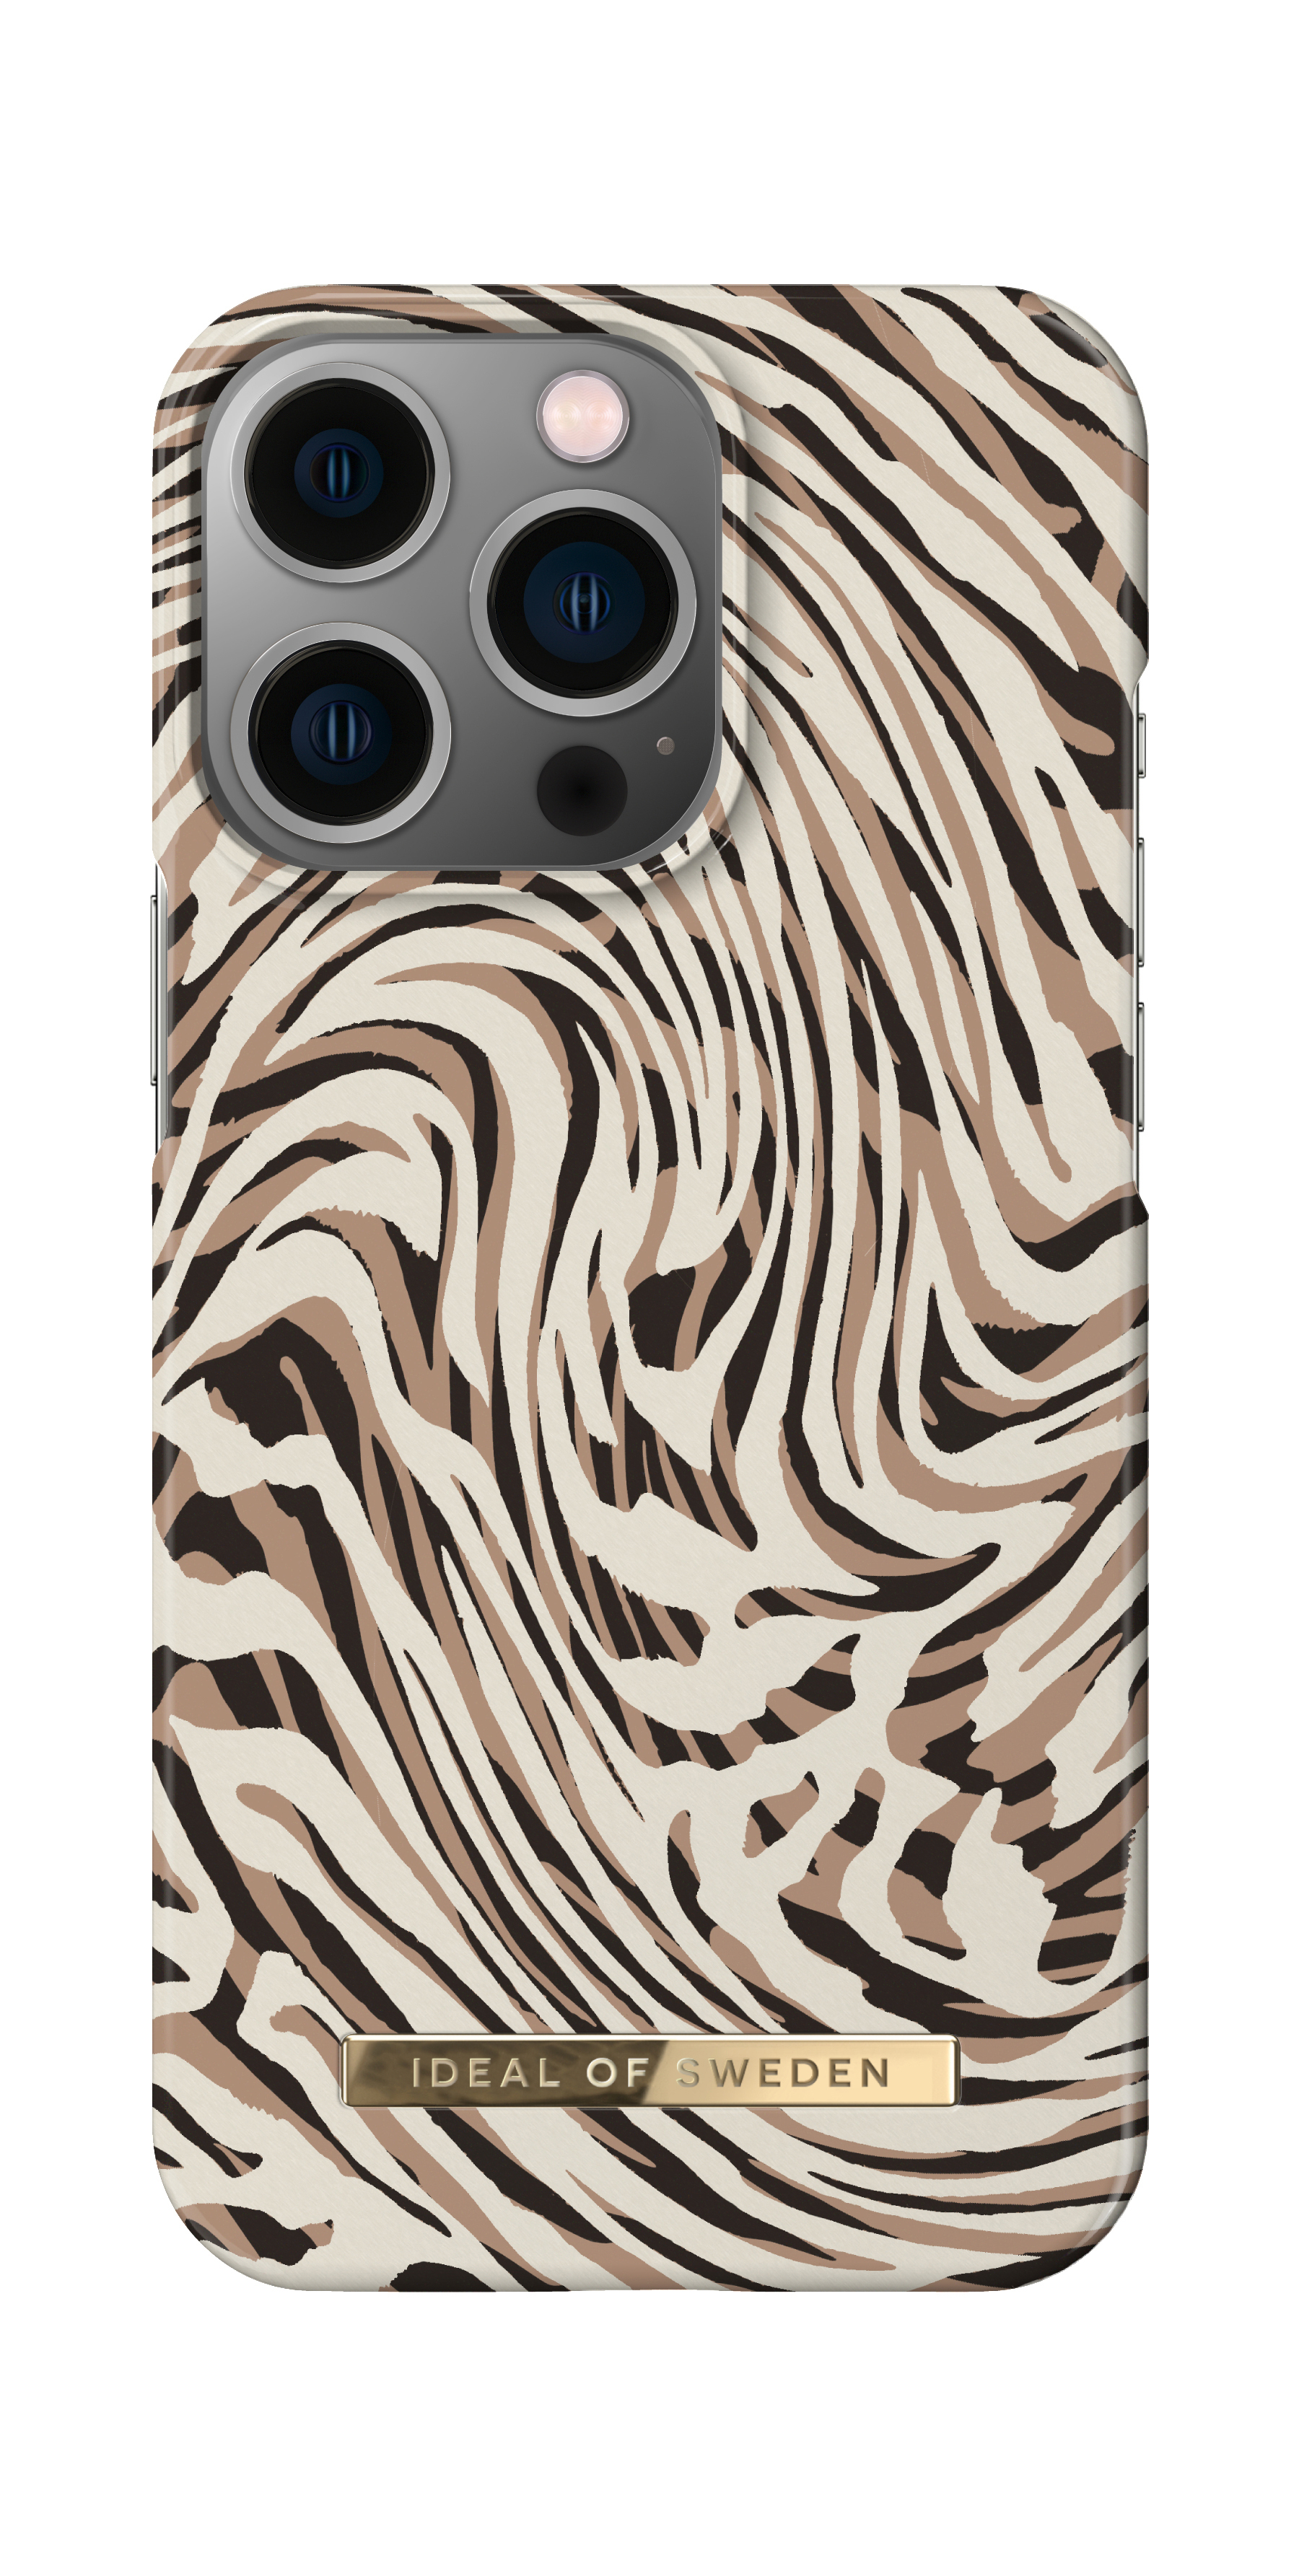 Zebra Apple, 13Pro, Hypnotic OF iPhone SWEDEN Backcover, IDEAL IDFCSS22-I2161P-392,